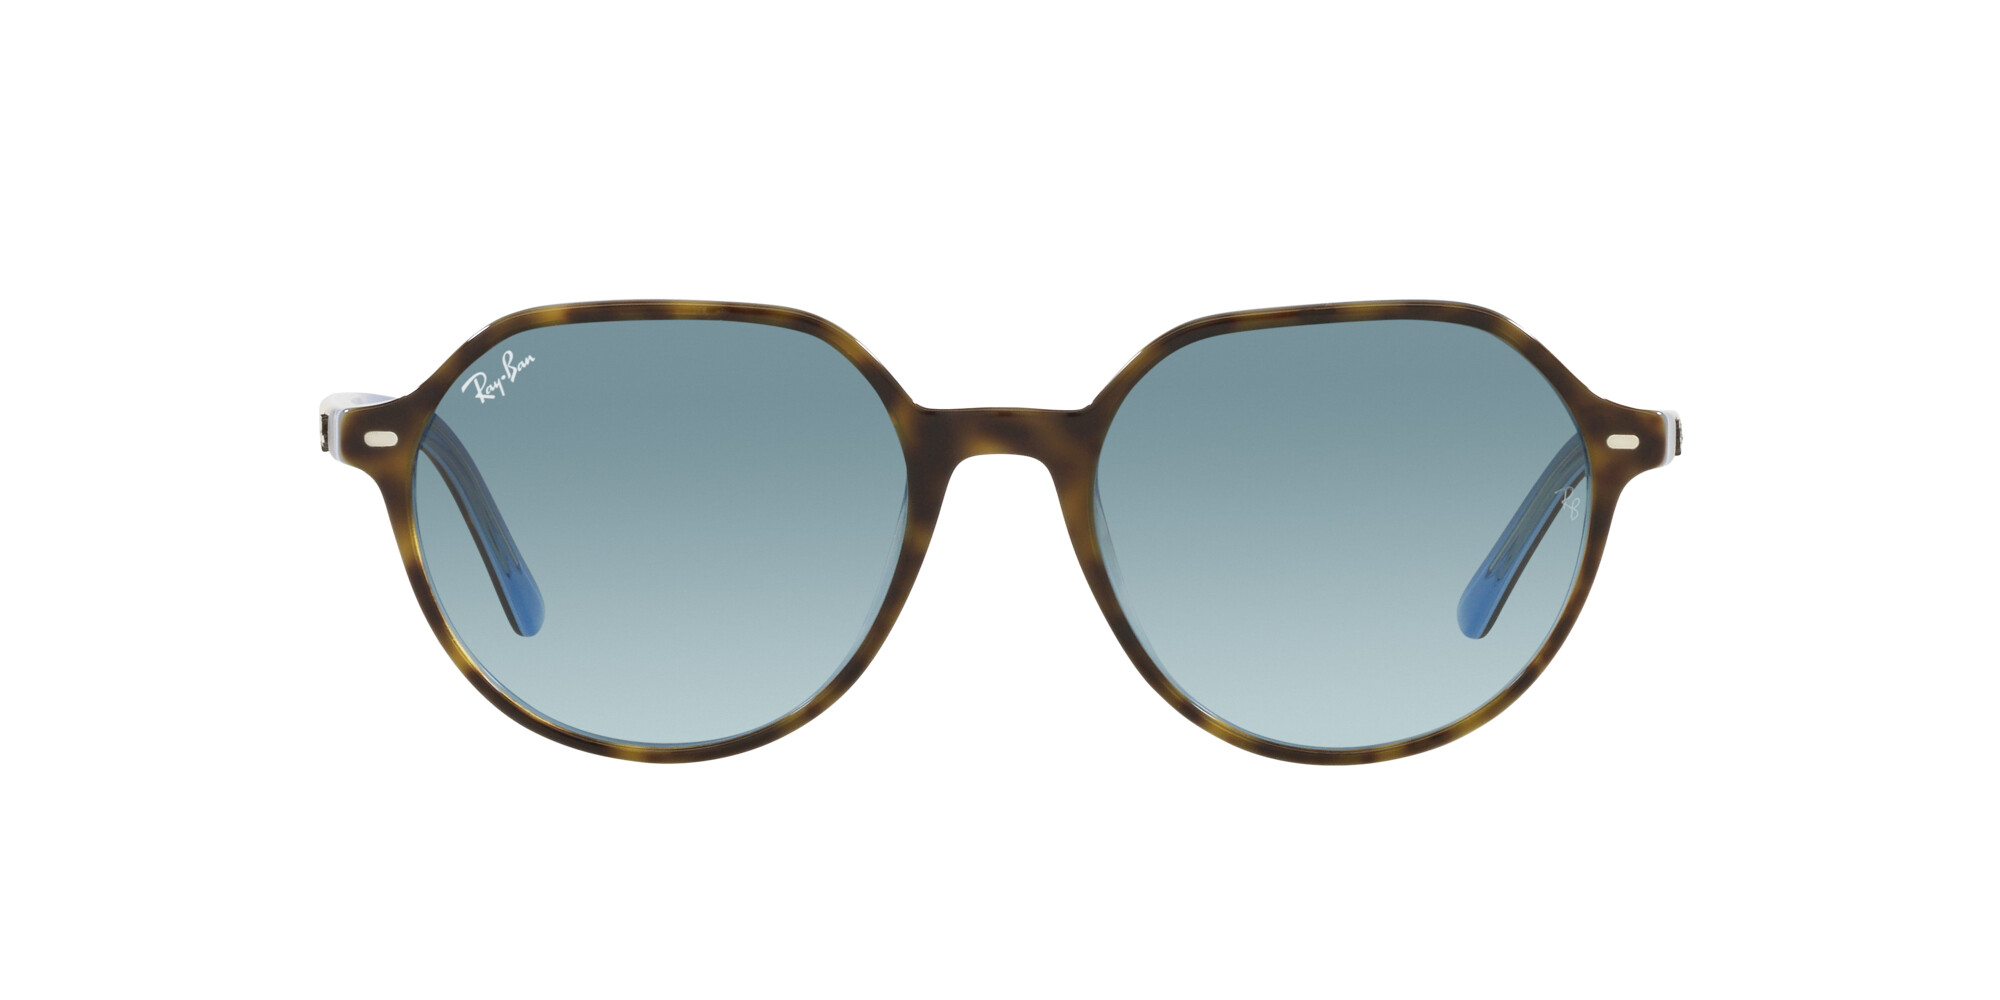 [products.image.front] Ray-Ban THALIA 0RB2195 13163M Sonnenbrille